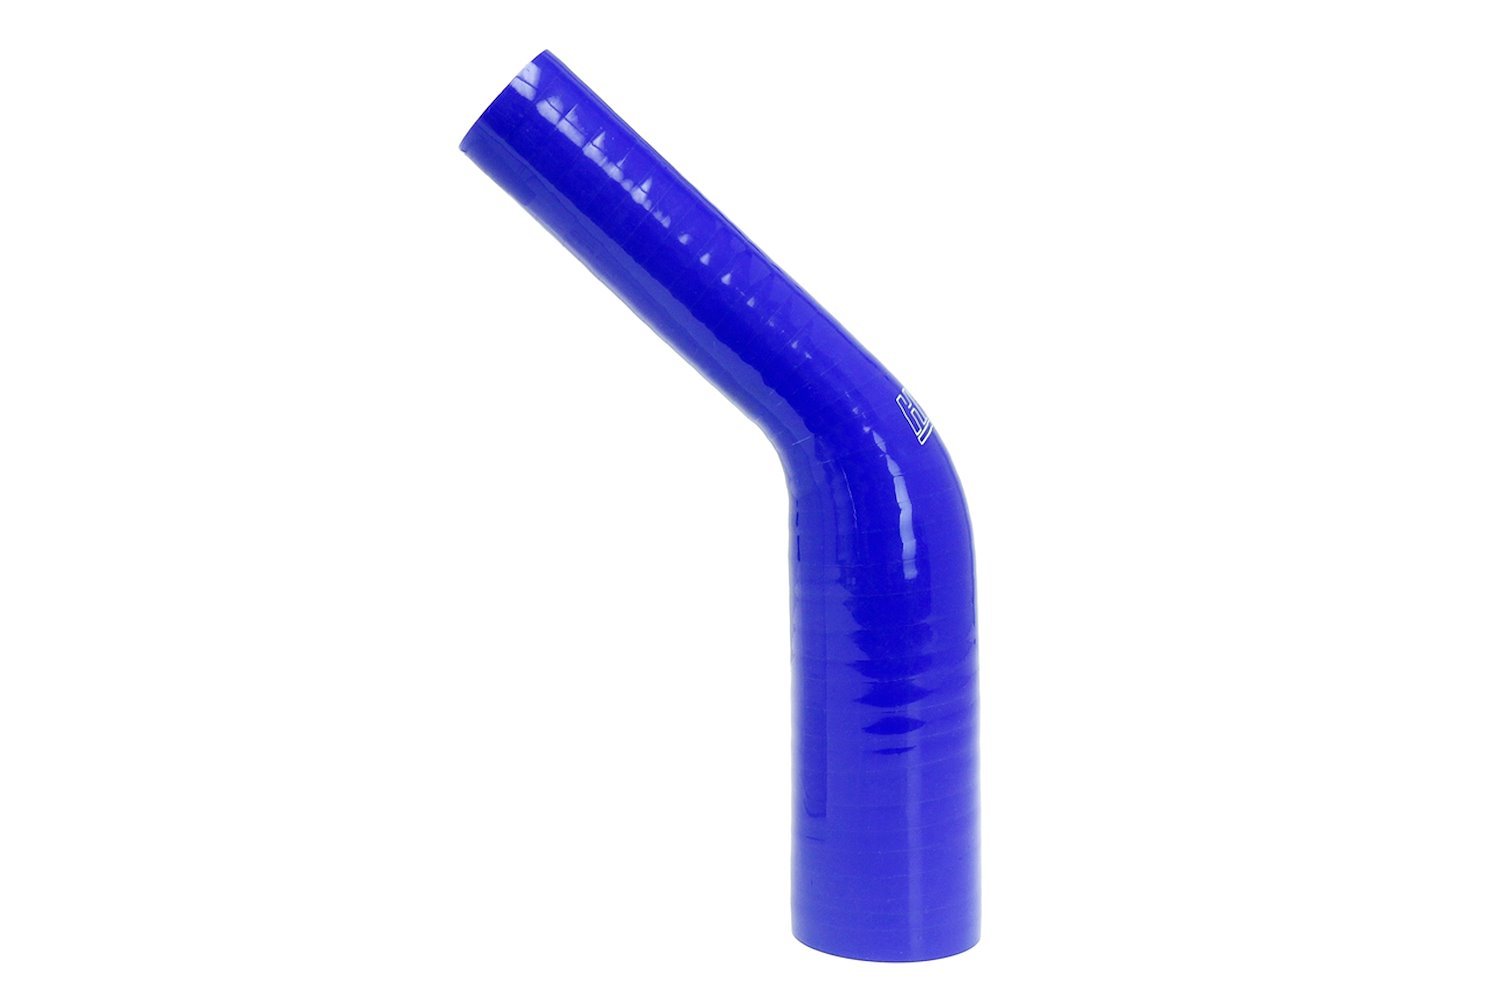 HTSER45-112-125-BLUE Silicone 45-Degree Elbow Hose, High-Temp 4-Ply Reinforced, 1-1/8 in. - 1-1/4 in. ID, Blue